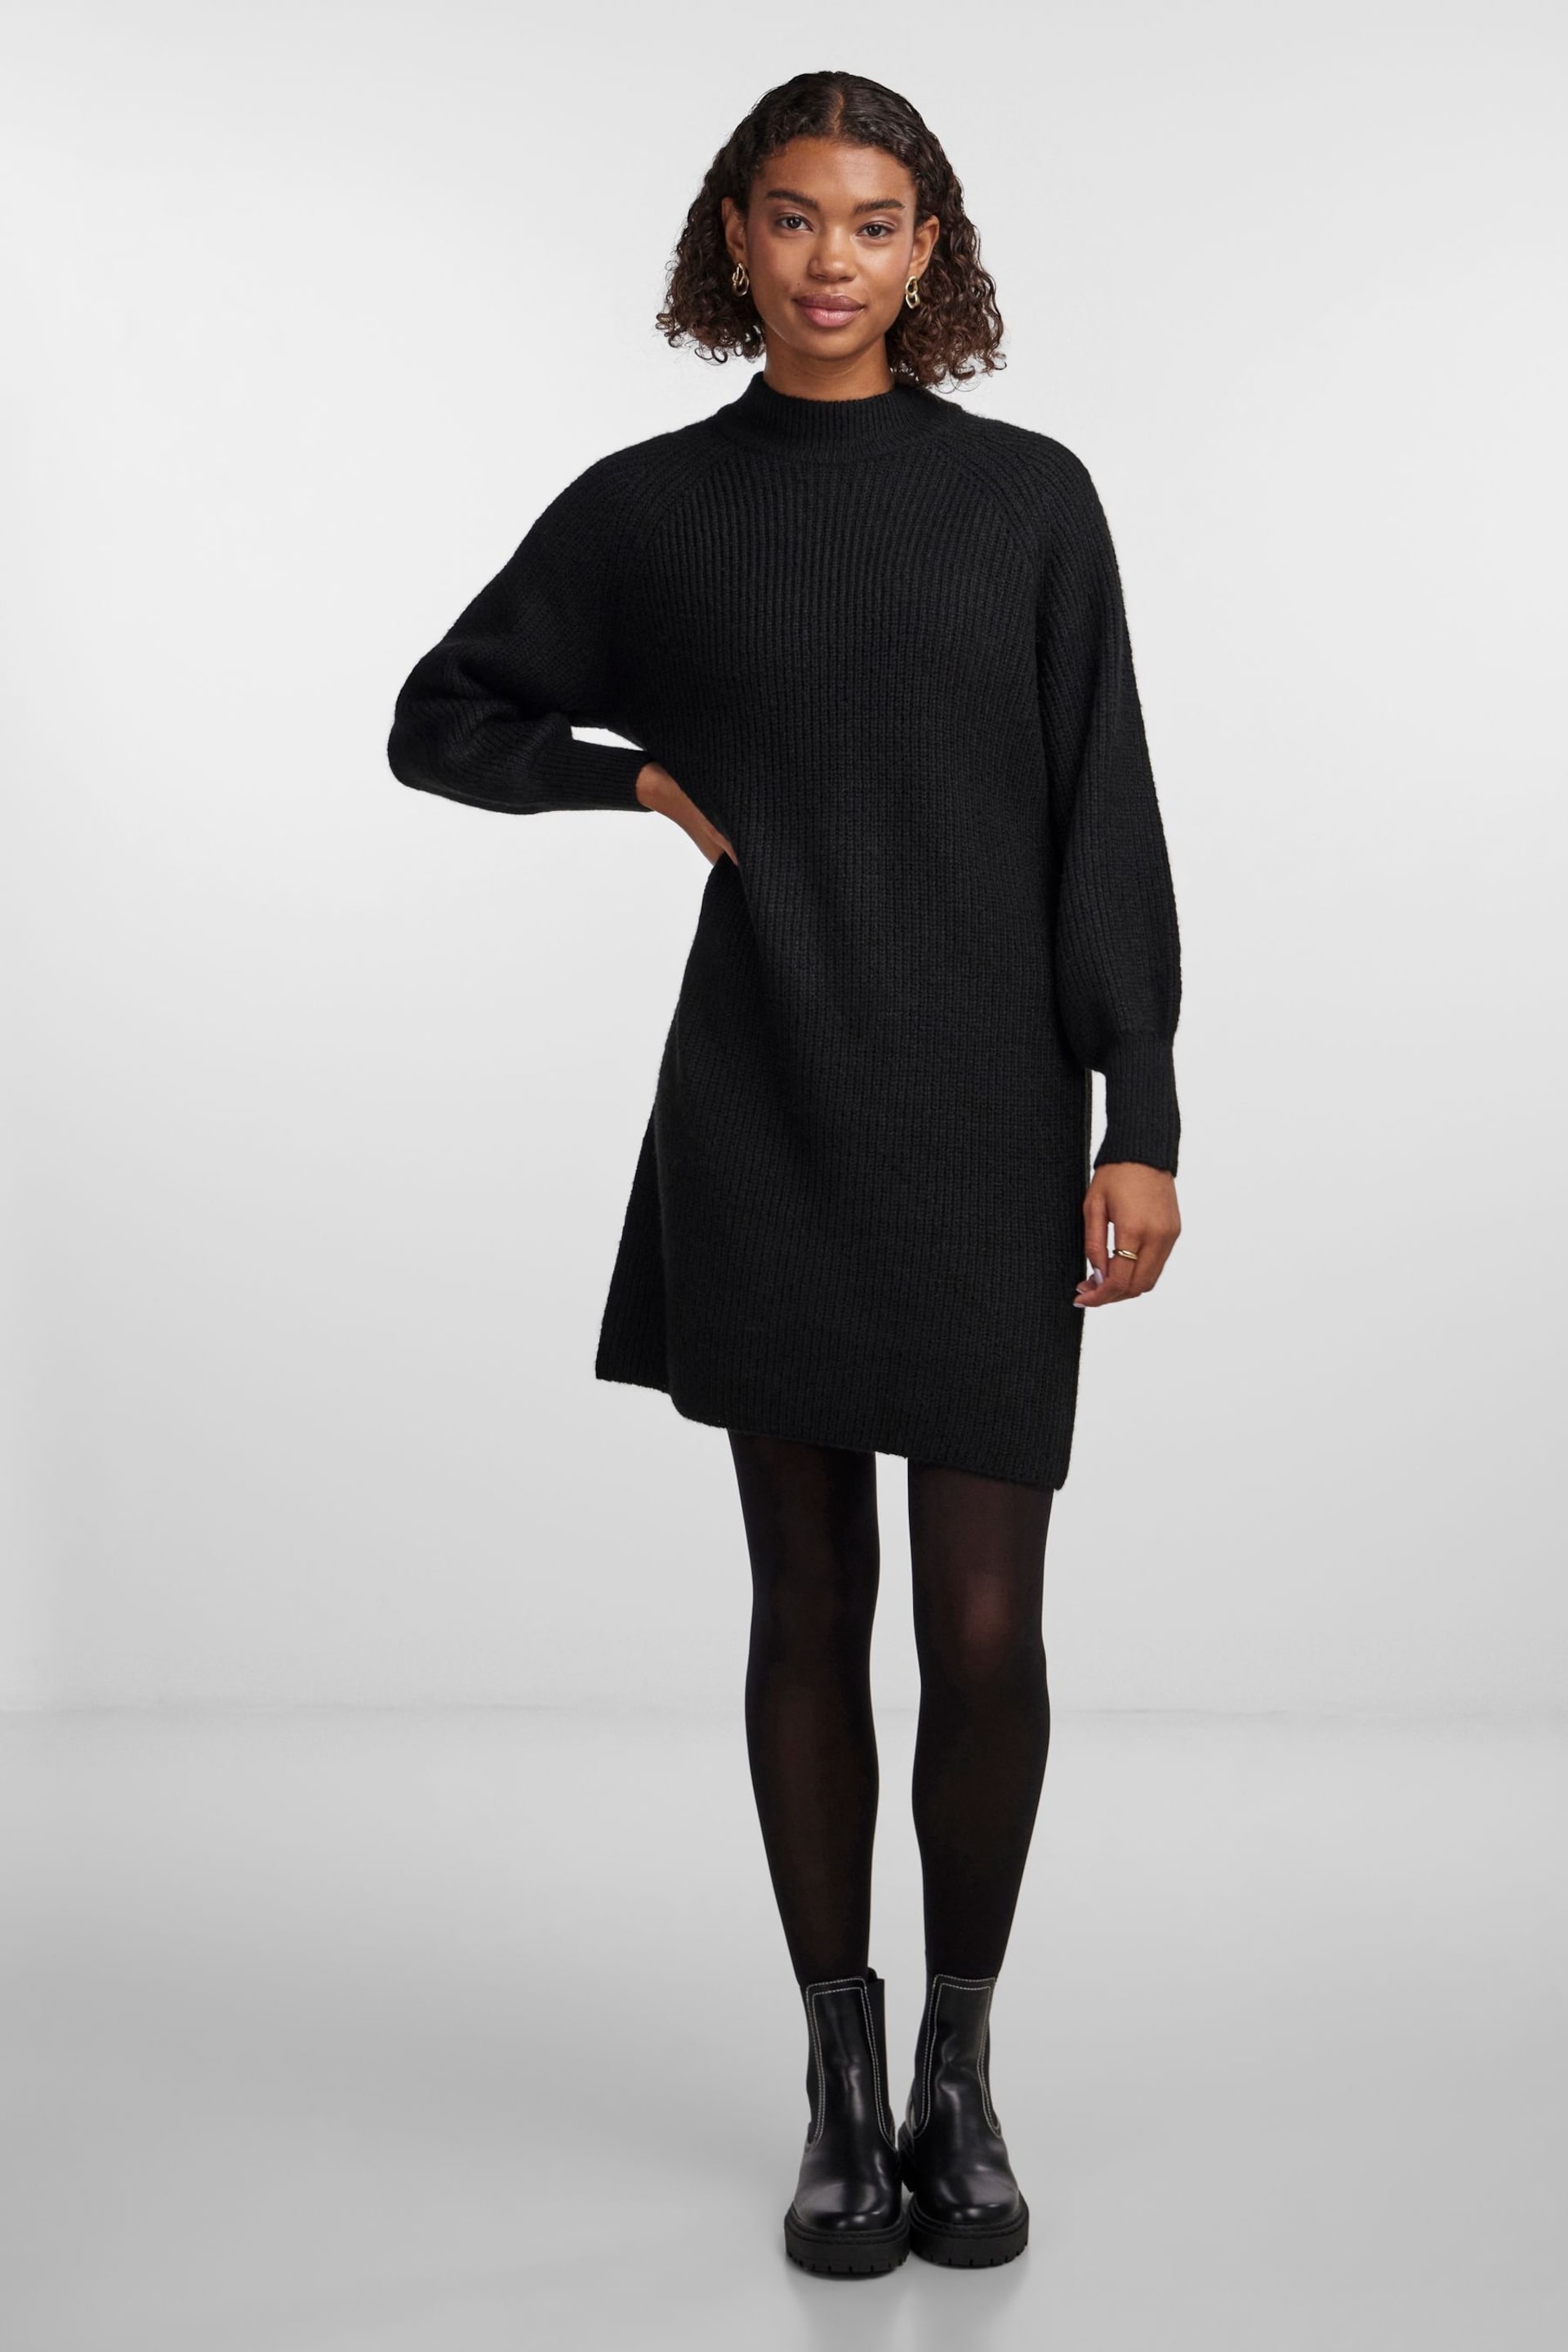 PIECES Black High Neck Knitted Balloon Sleeve Jumper Dress - Image 3 of 5